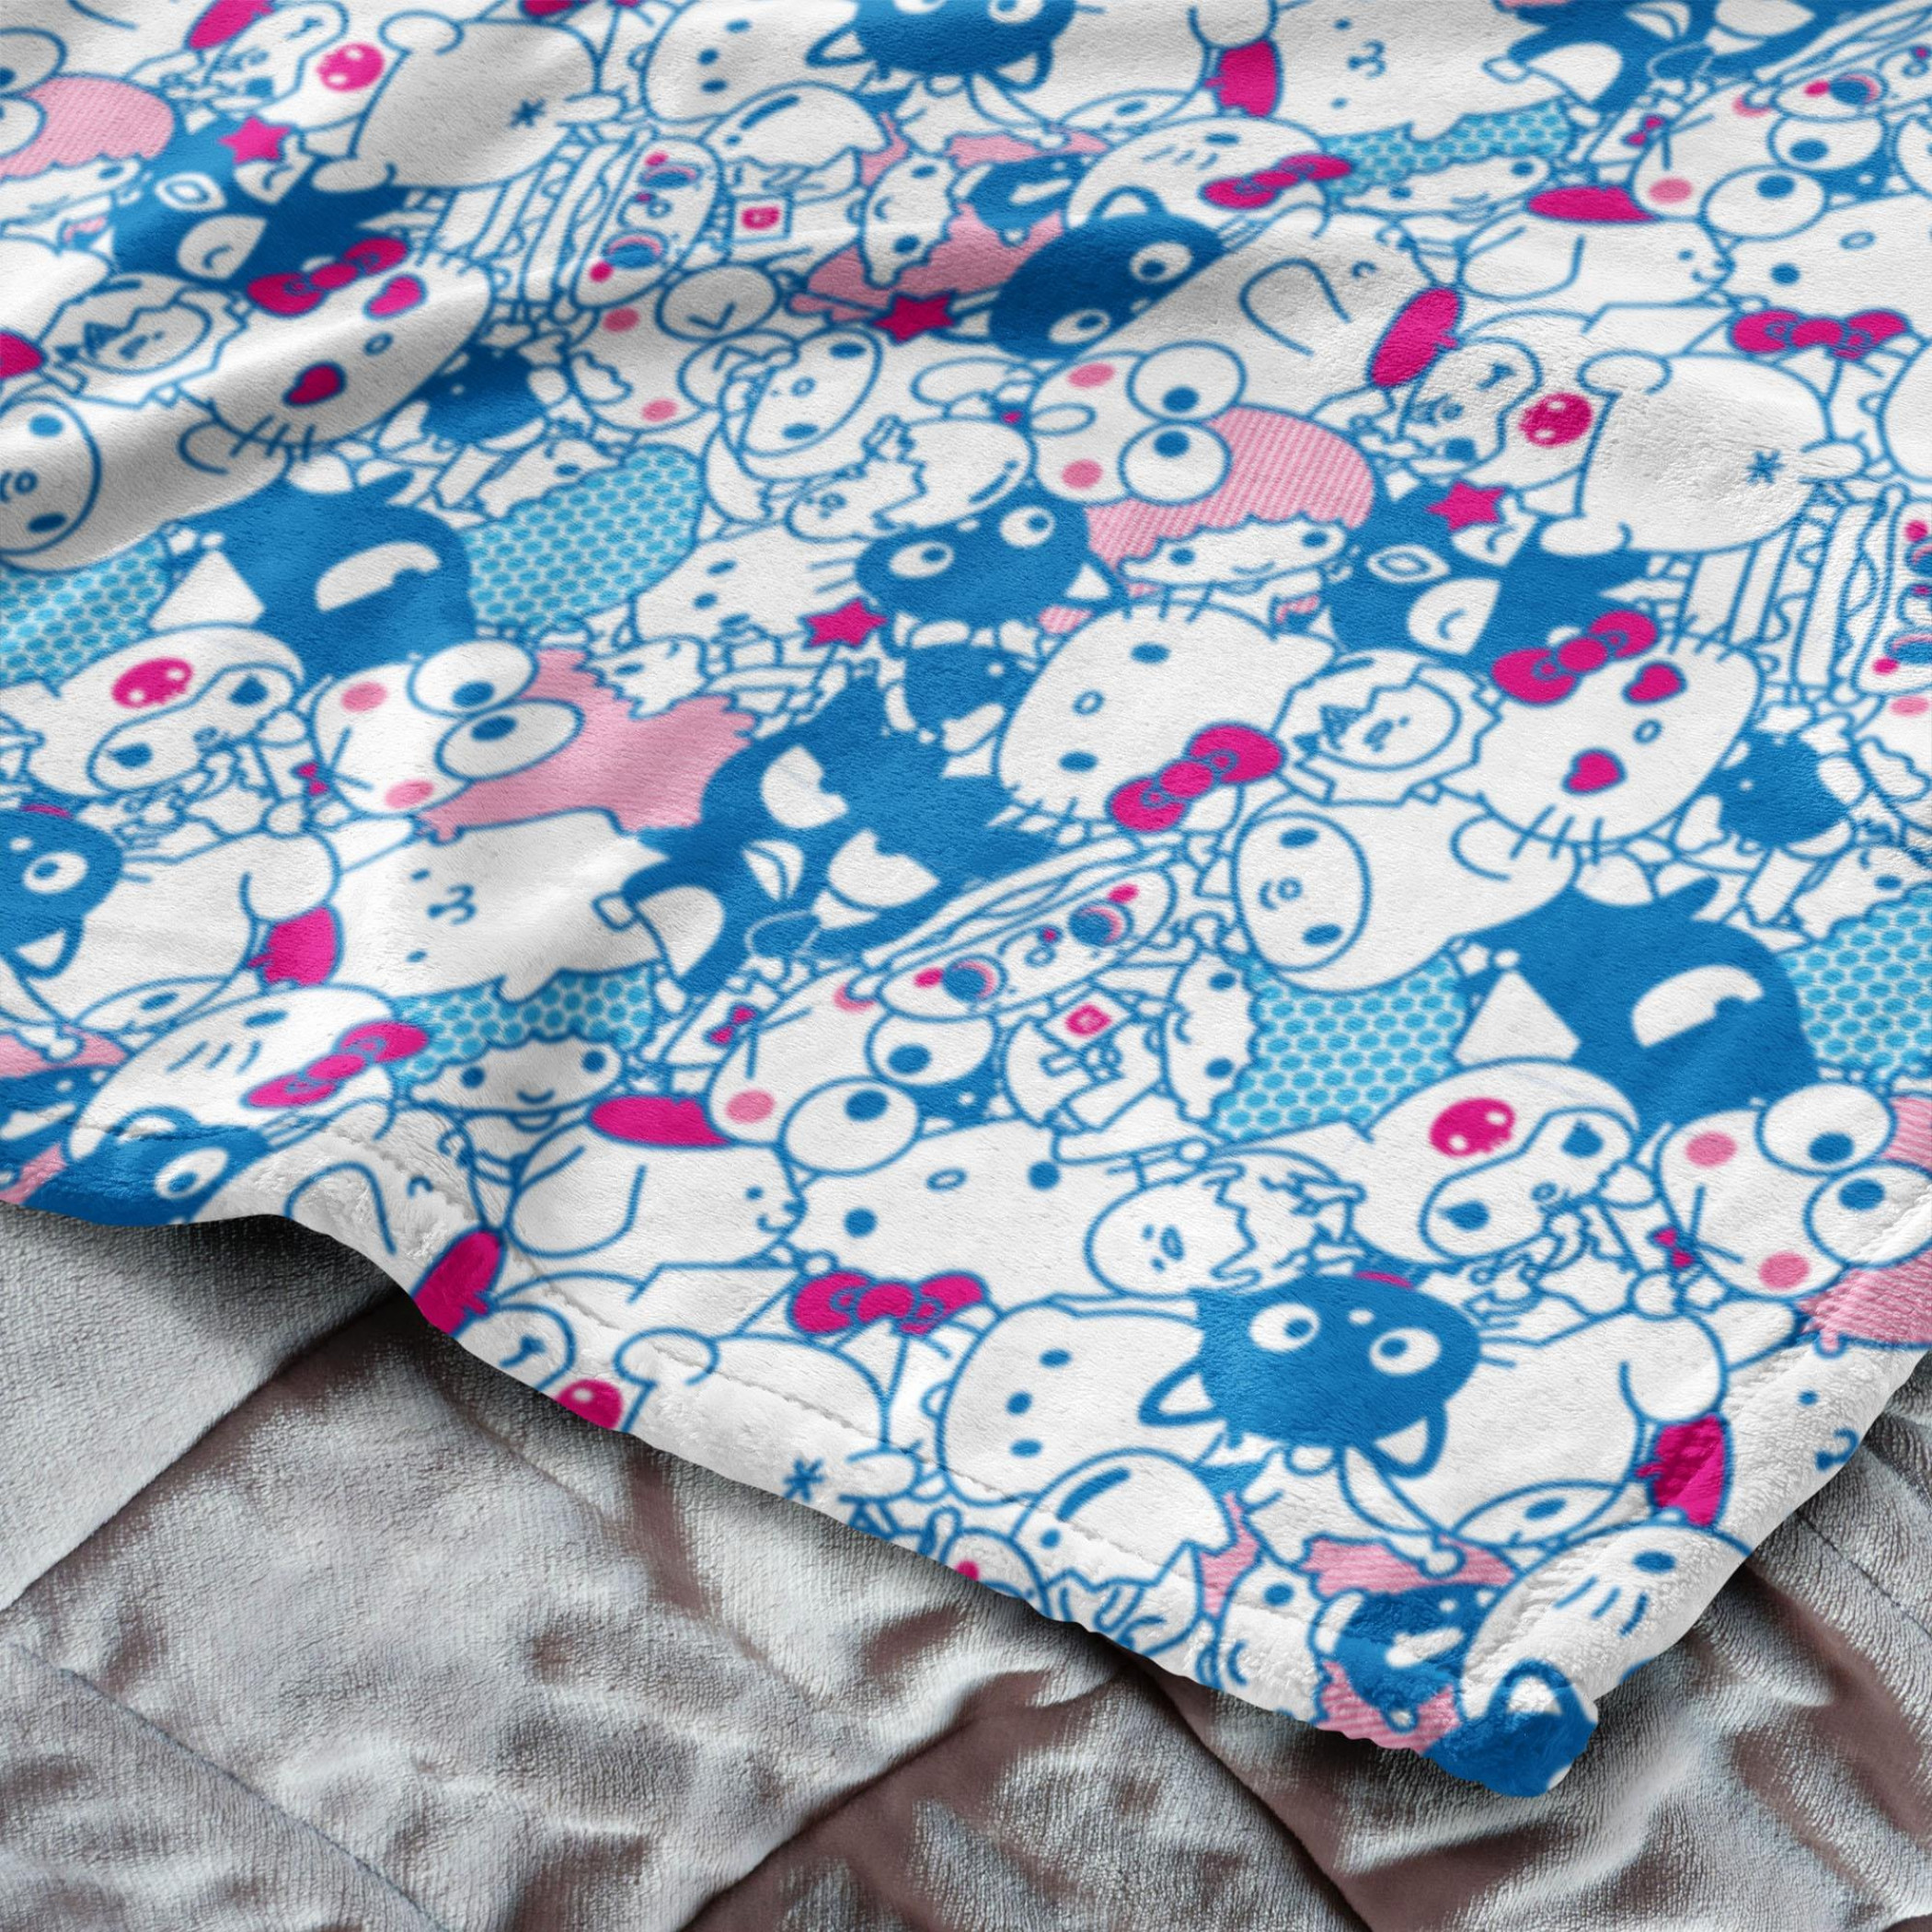 Hello Kitty and Friends Snuggled Up Silk Touch Throw Blanket 50" x 70"